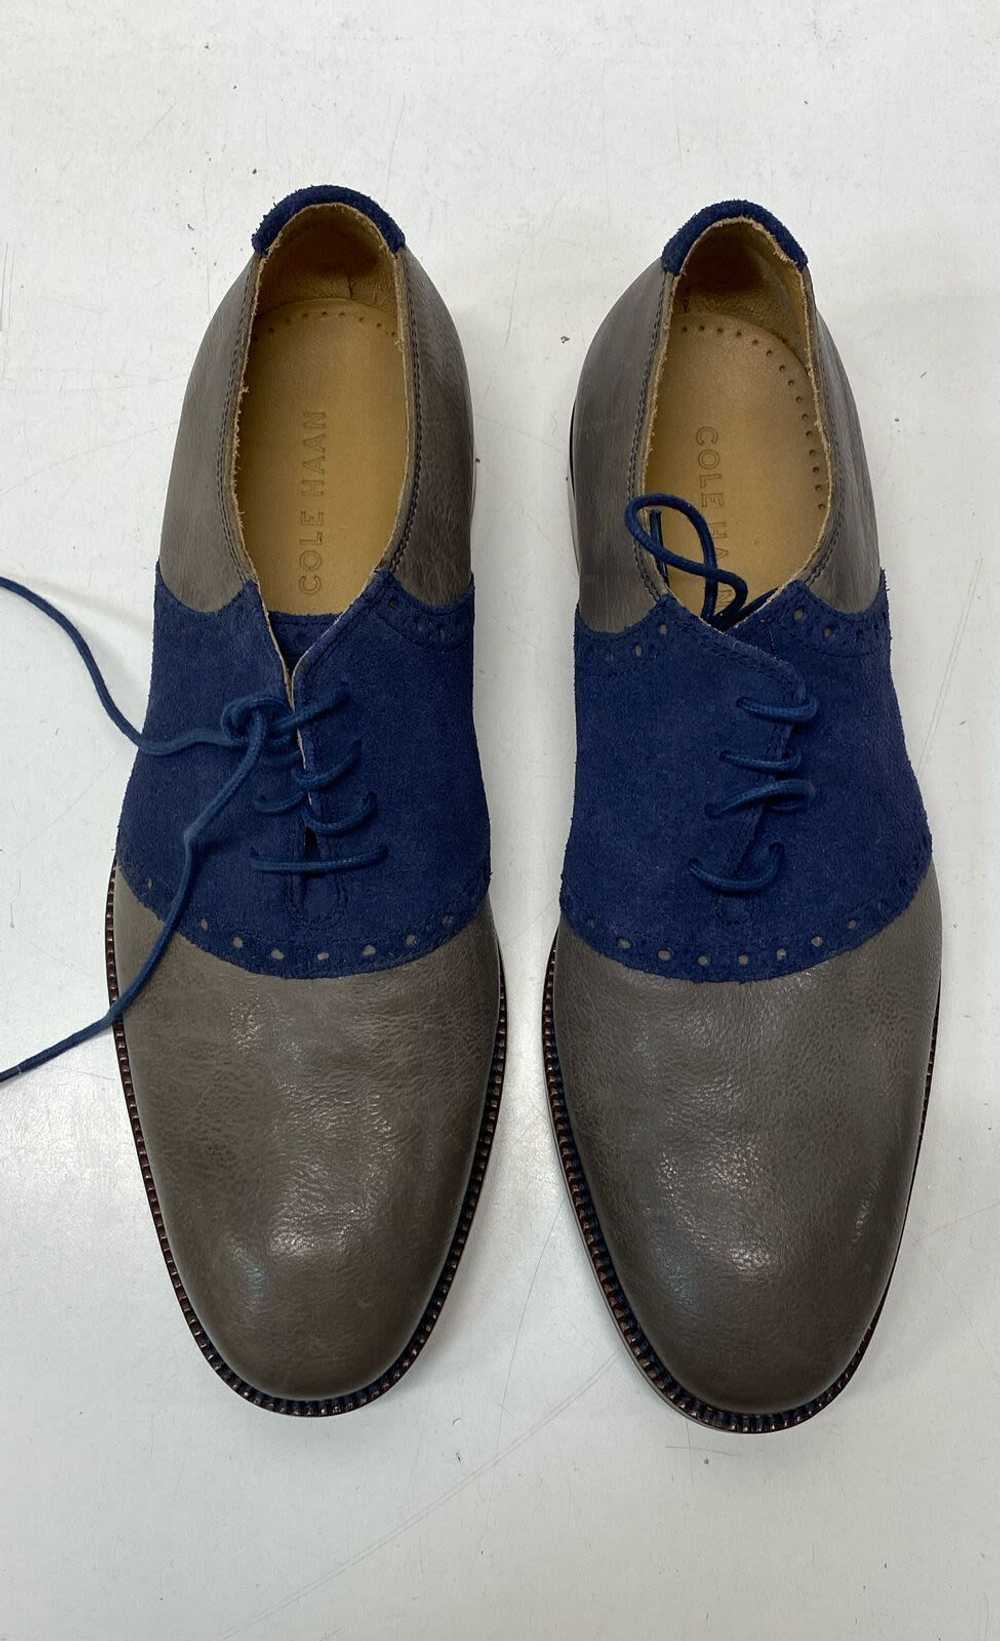 Cole Haan Leather Suede Oxford Shoes Grey 8 - image 5